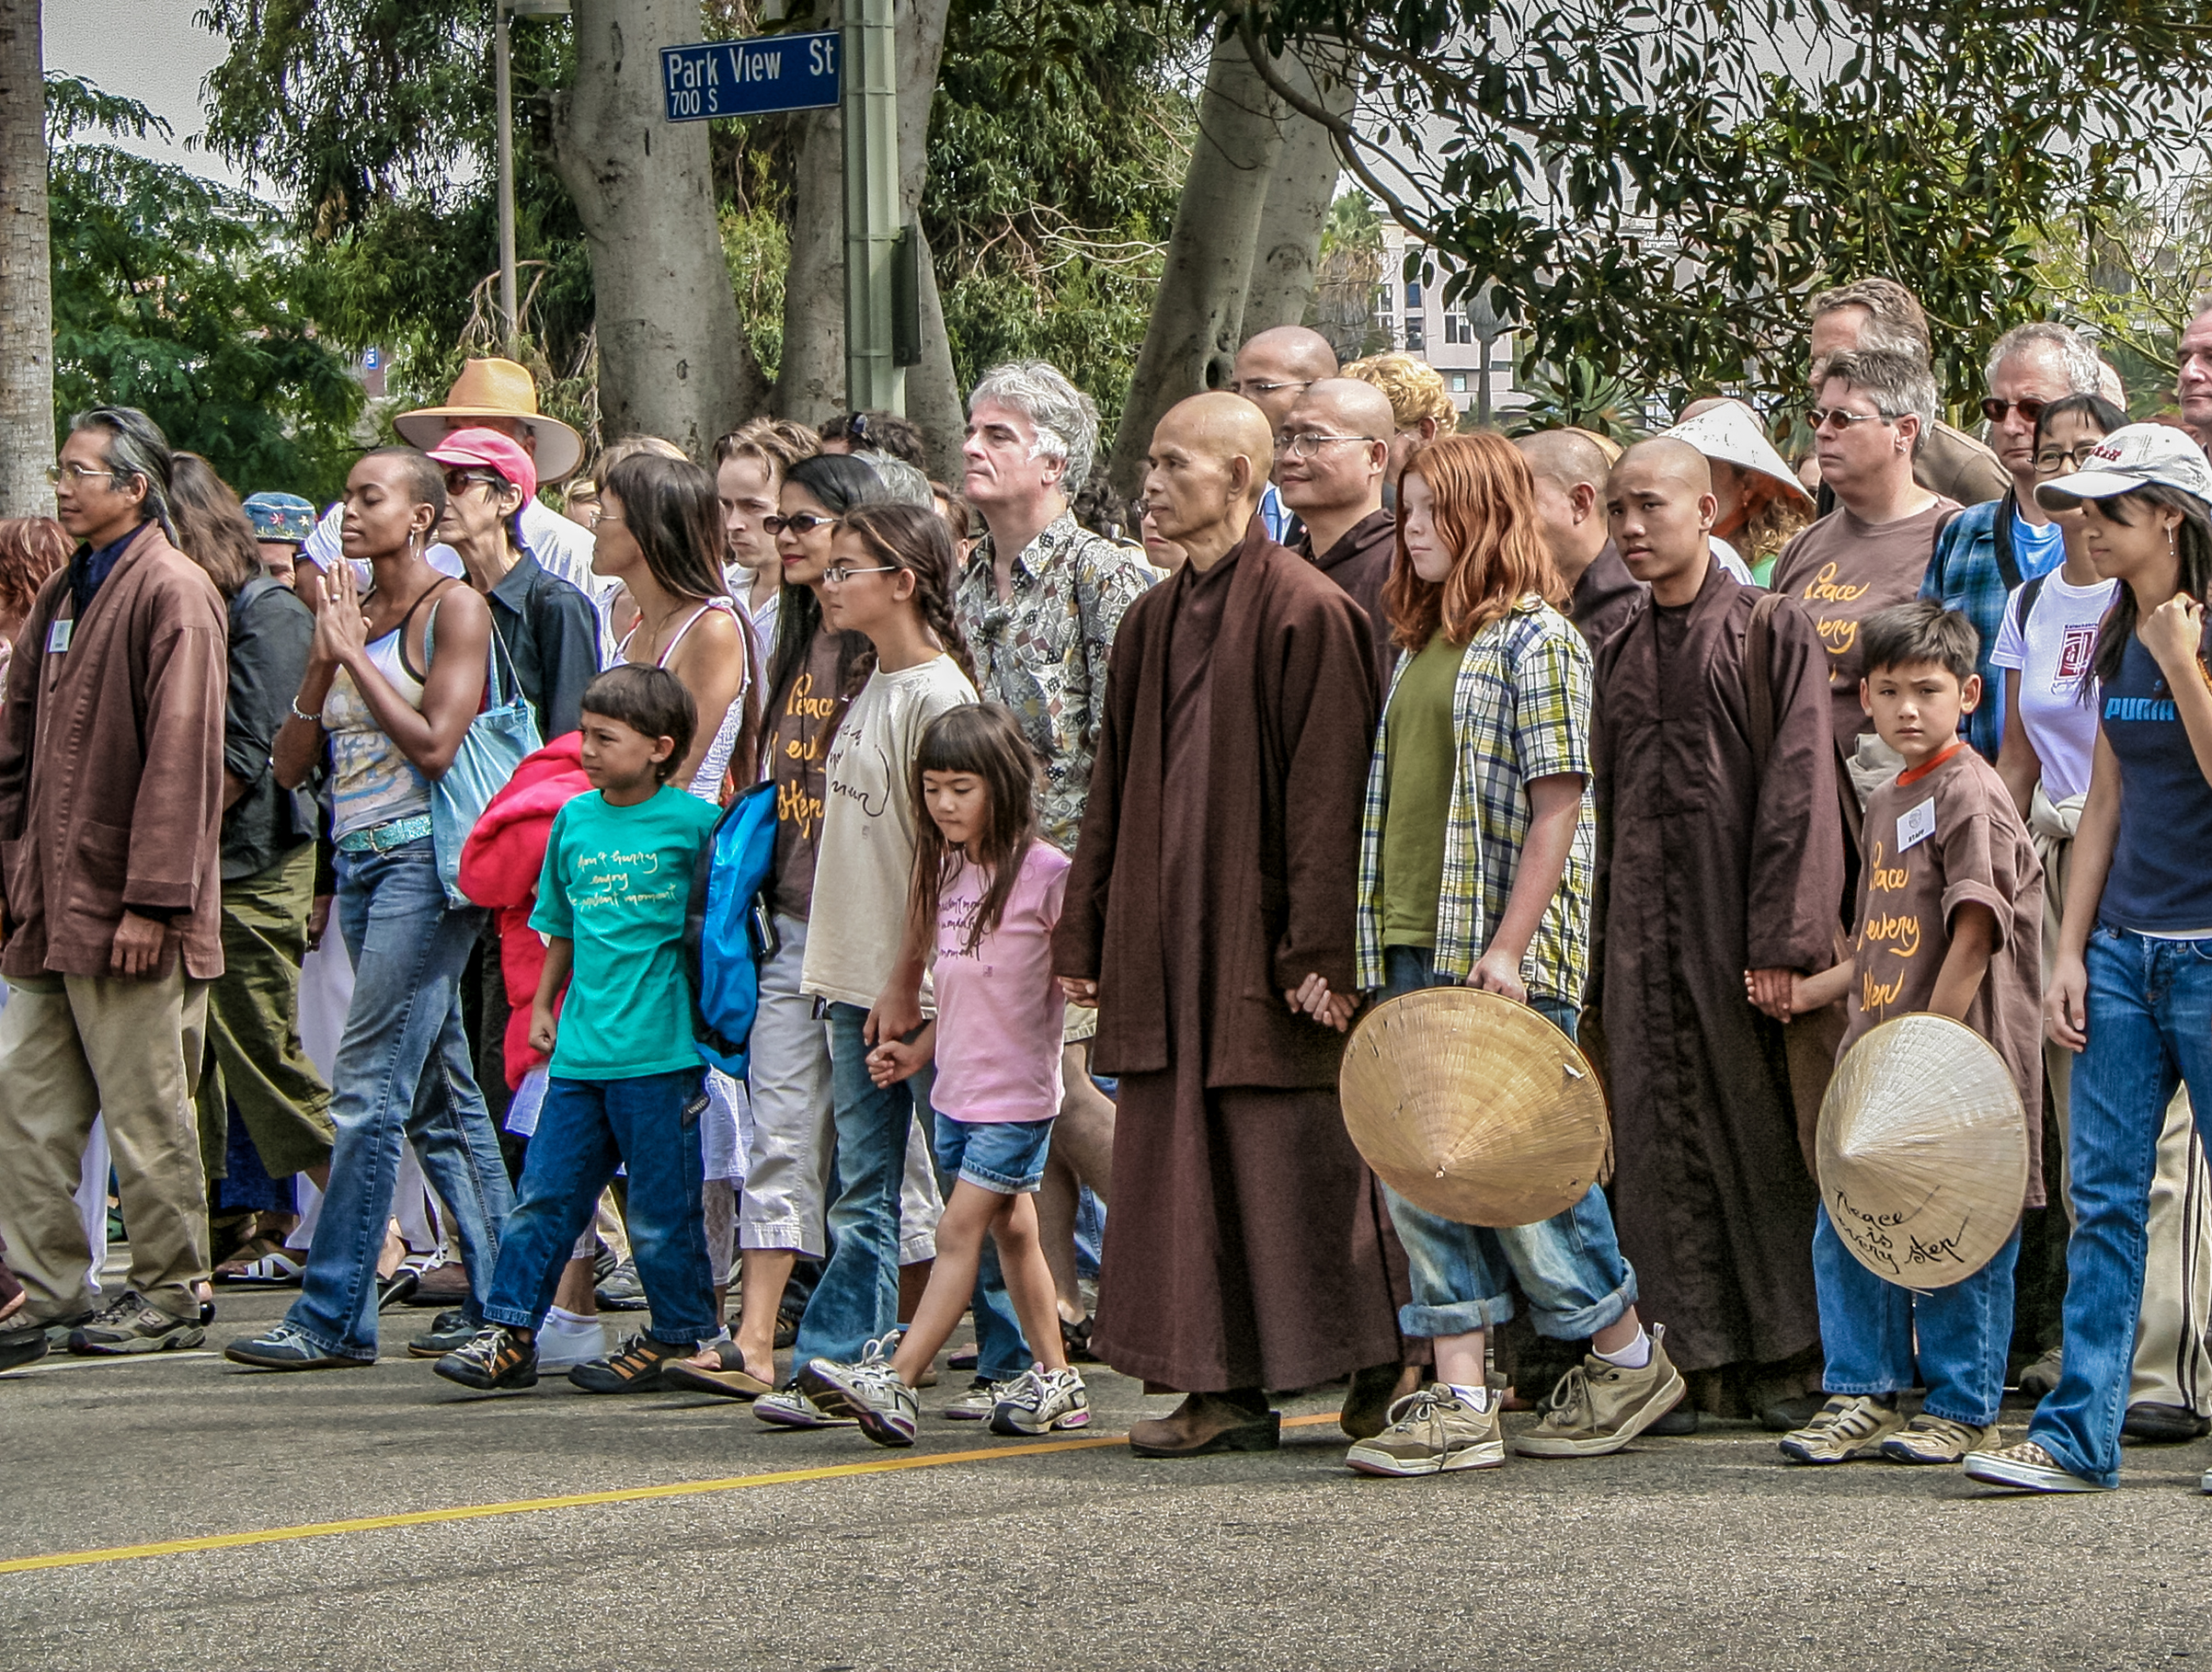 Nhat Hanh, center, led a silent peace walk in Los Angeles in 2005, as the Iraq War escalated (Paul Davis—Touching Peace Photography)